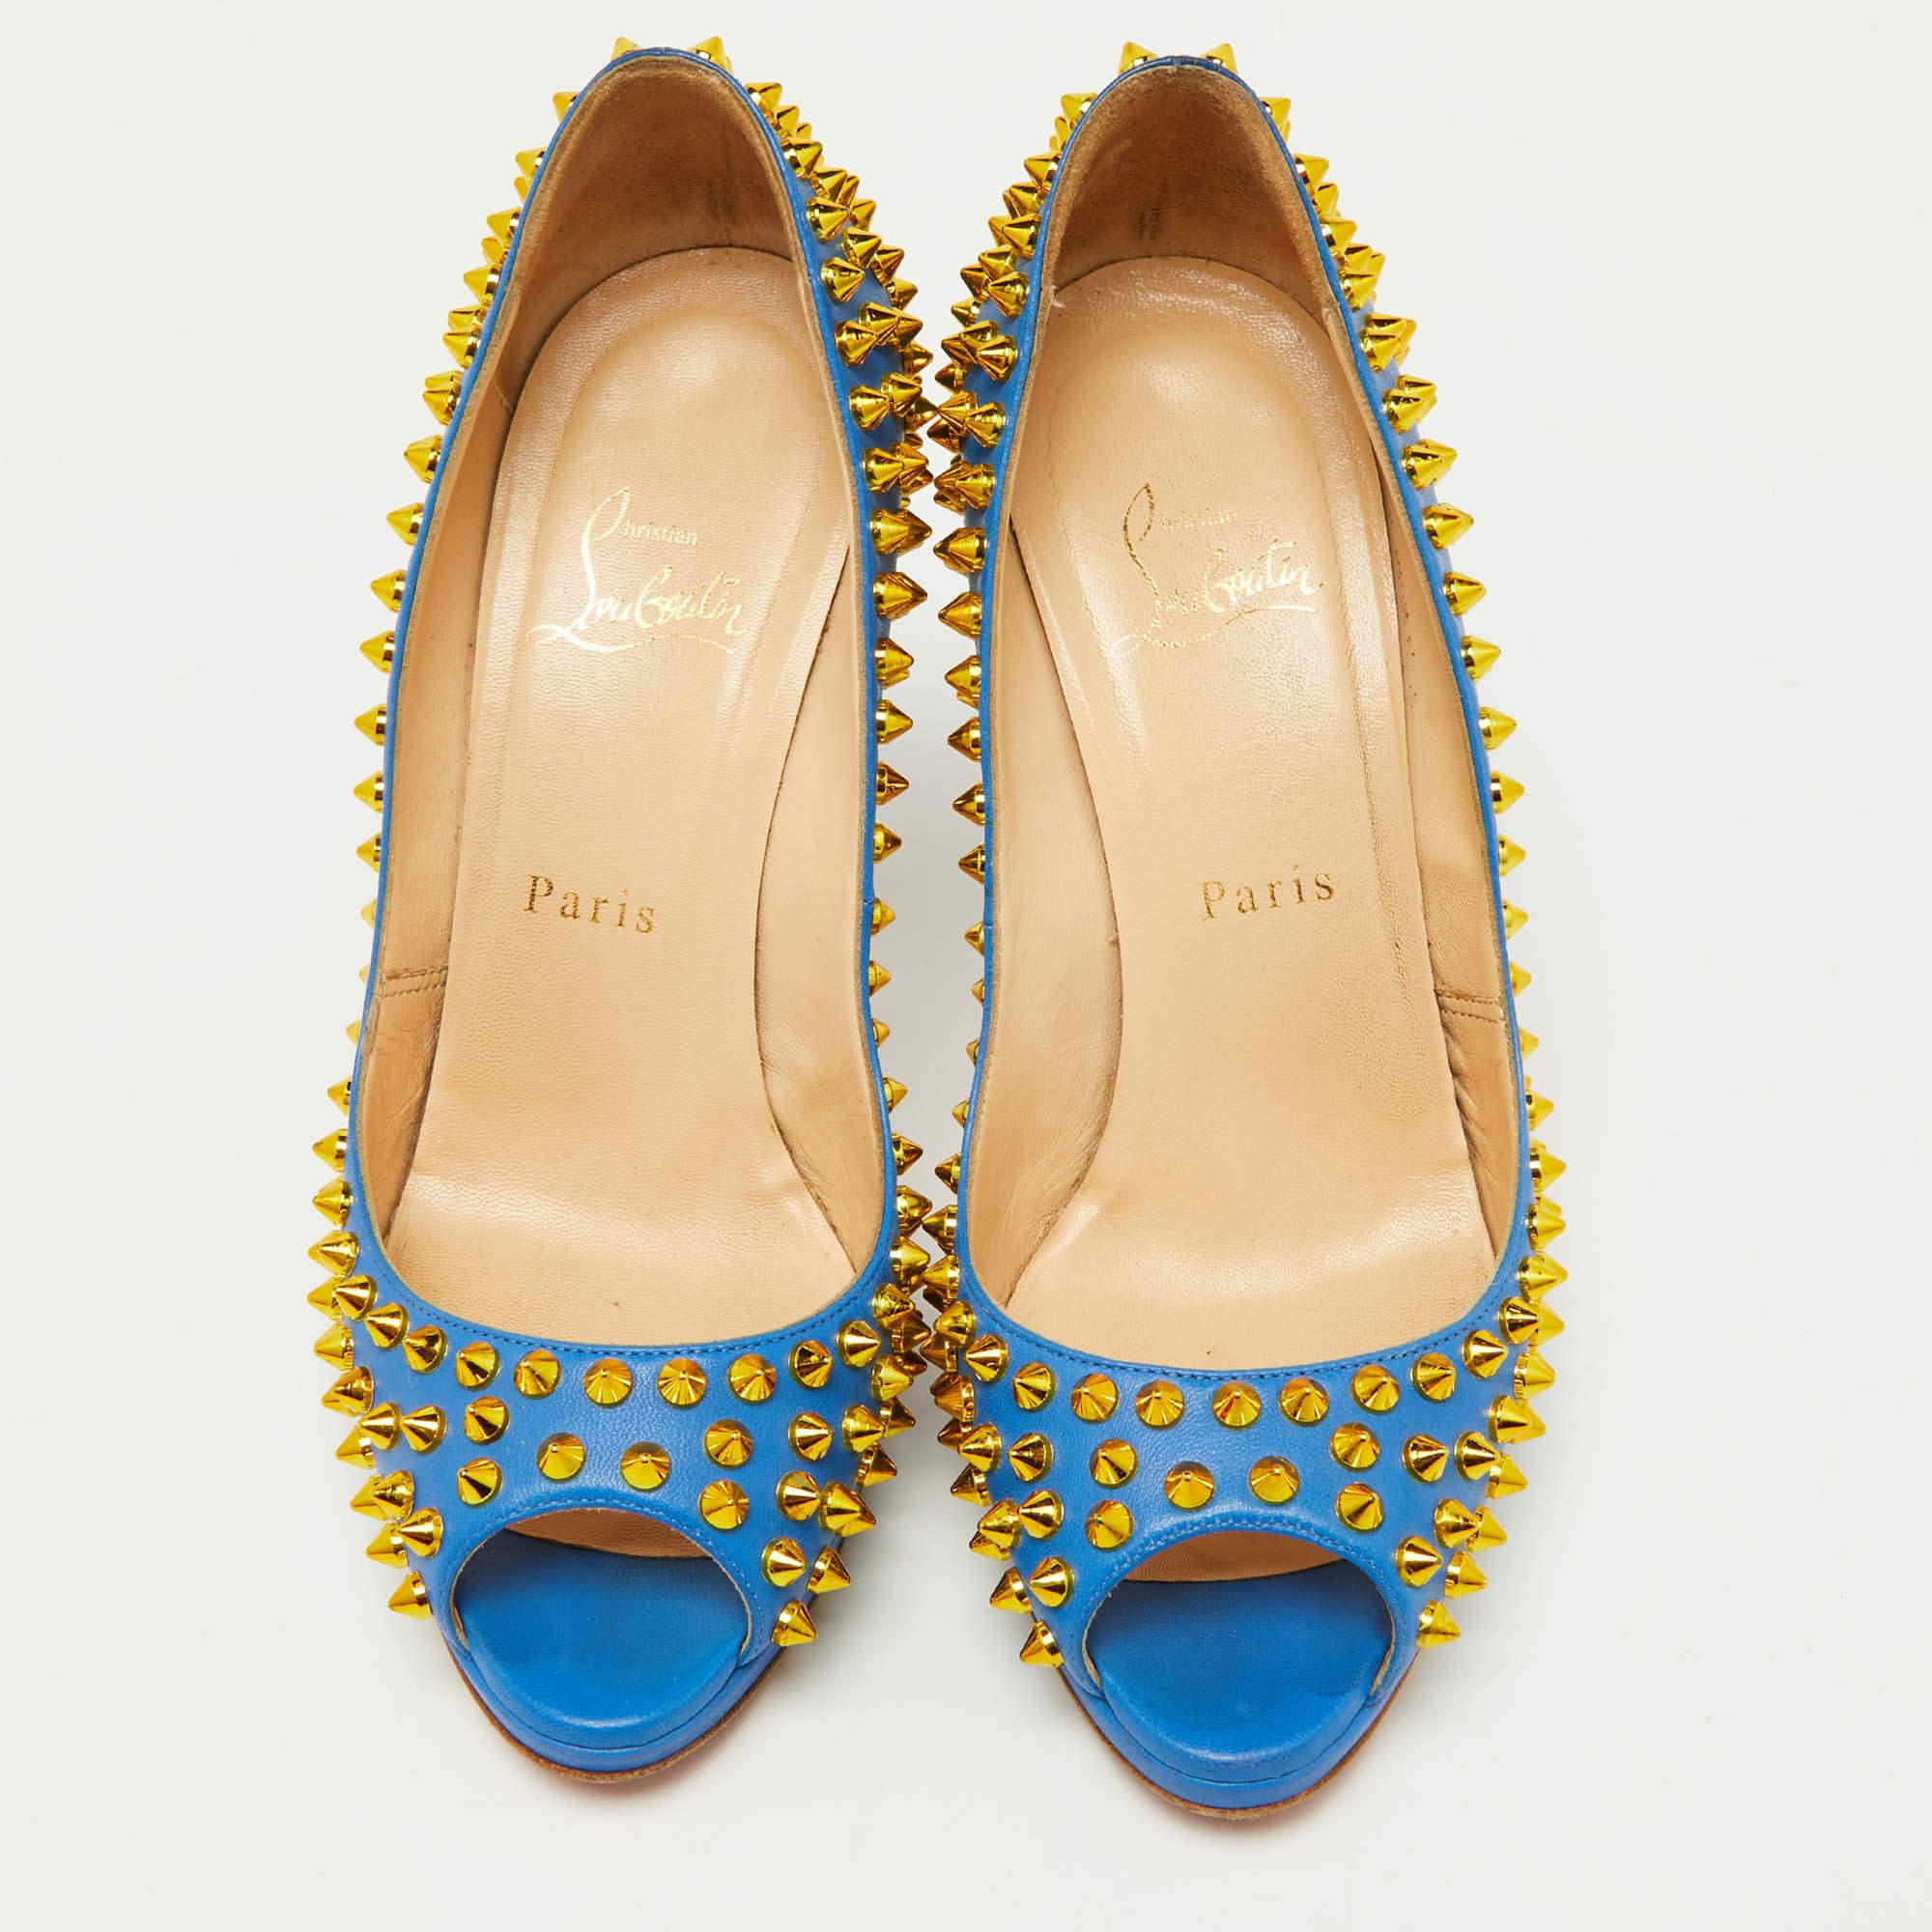 Christian Louboutin Blue Leather Yolanda Spikes Pumps Size 37.5 For Sale 1